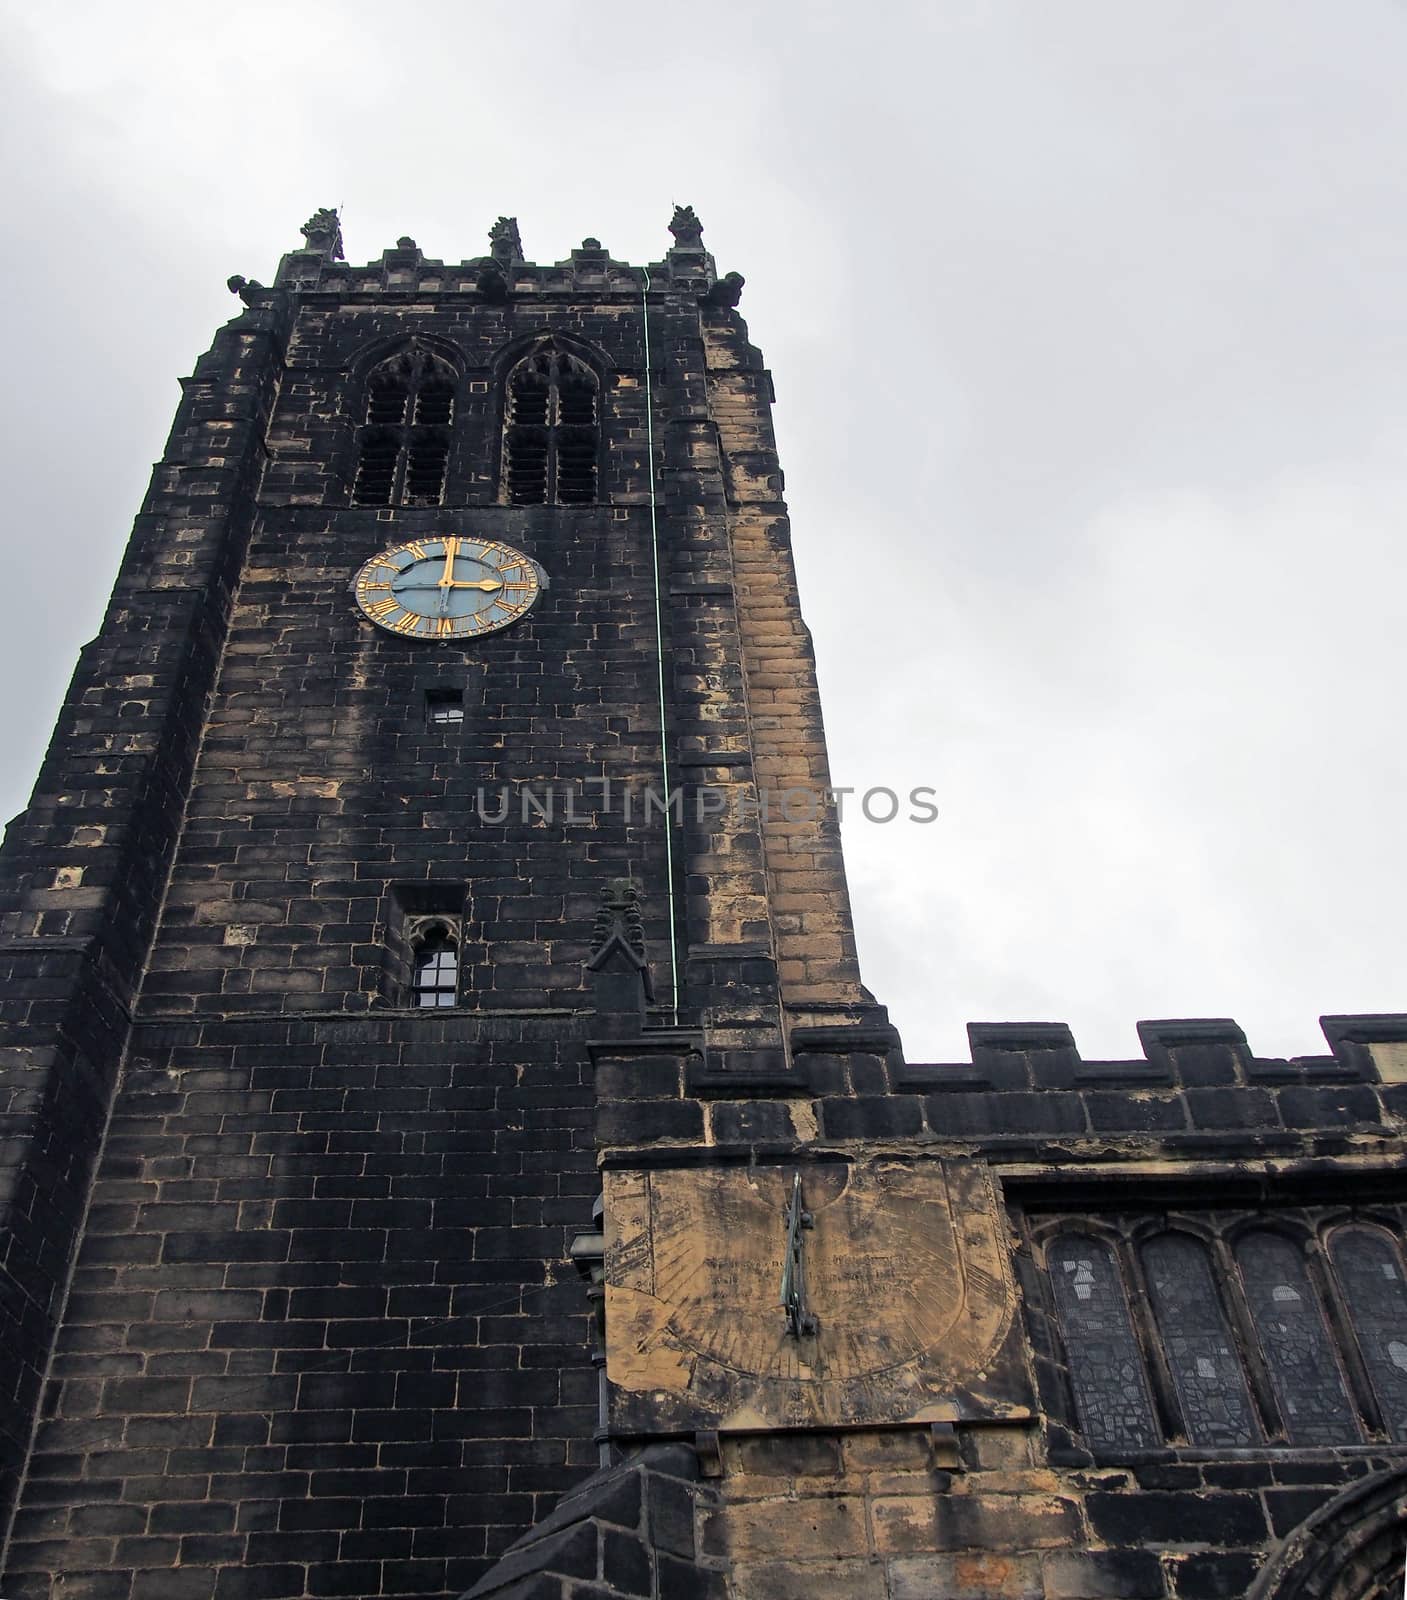 a view of halifax minster in west yorkshire with dark stonework on the medieval church tower and clock by philopenshaw